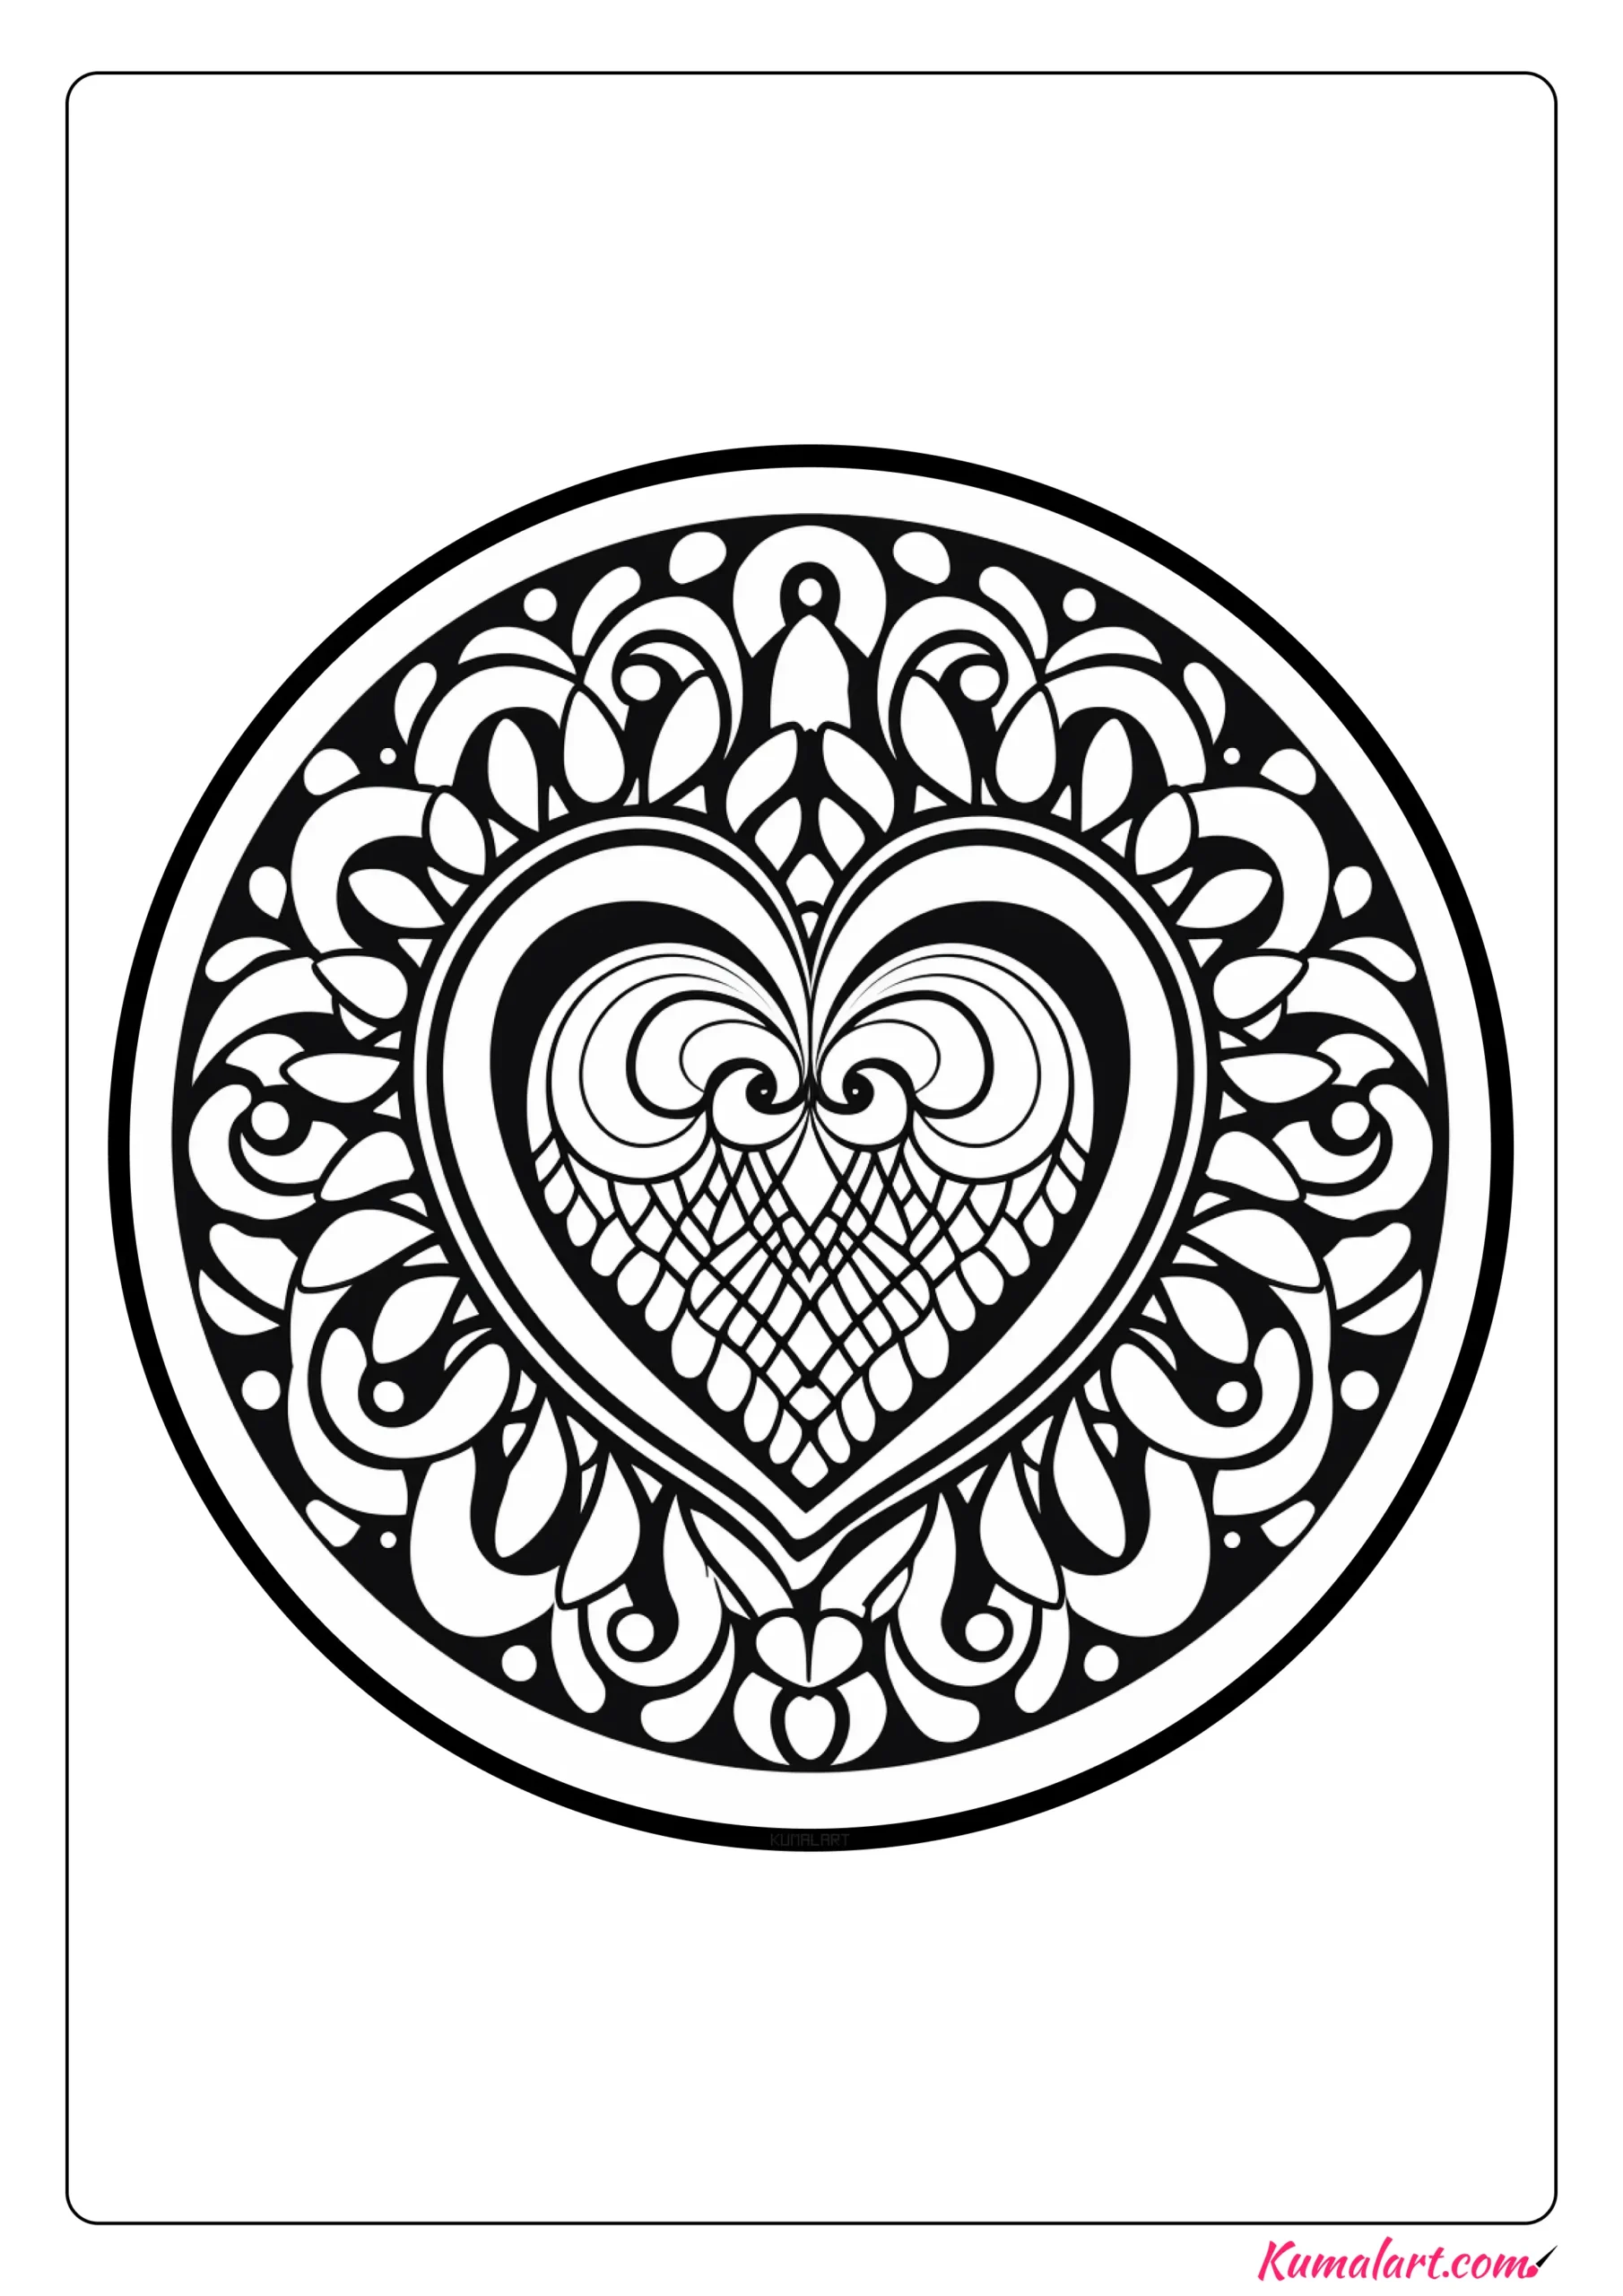 Feather Heart Mandala Coloring Page